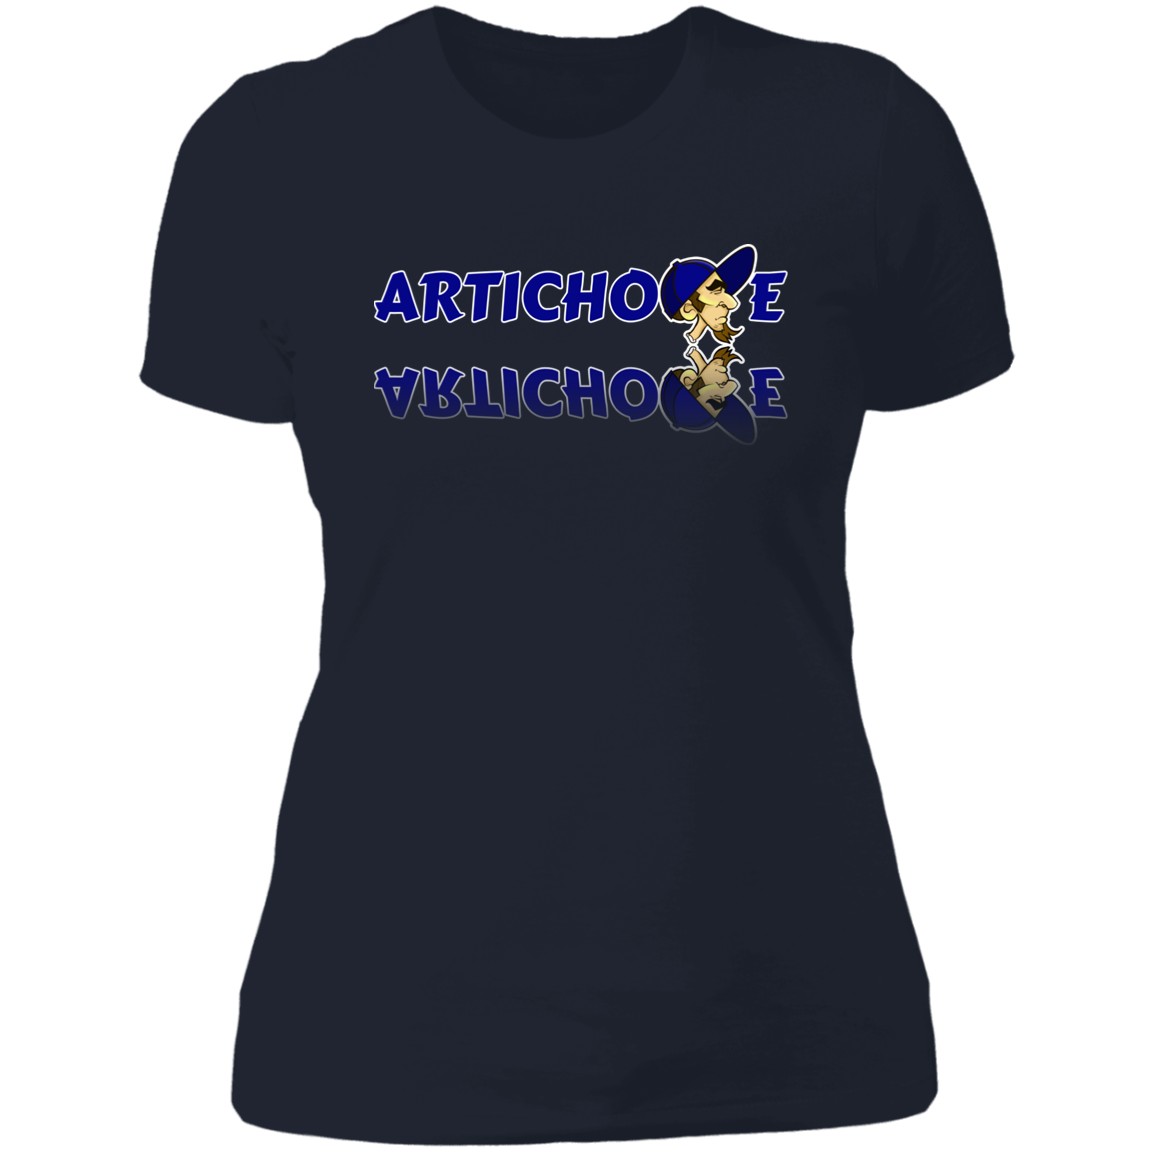 ZZ#20 ArtichokeUSA Characters and Fonts. "Clem" Let’s Create Your Own Design Today. Ladies' Boyfriend T-Shirt